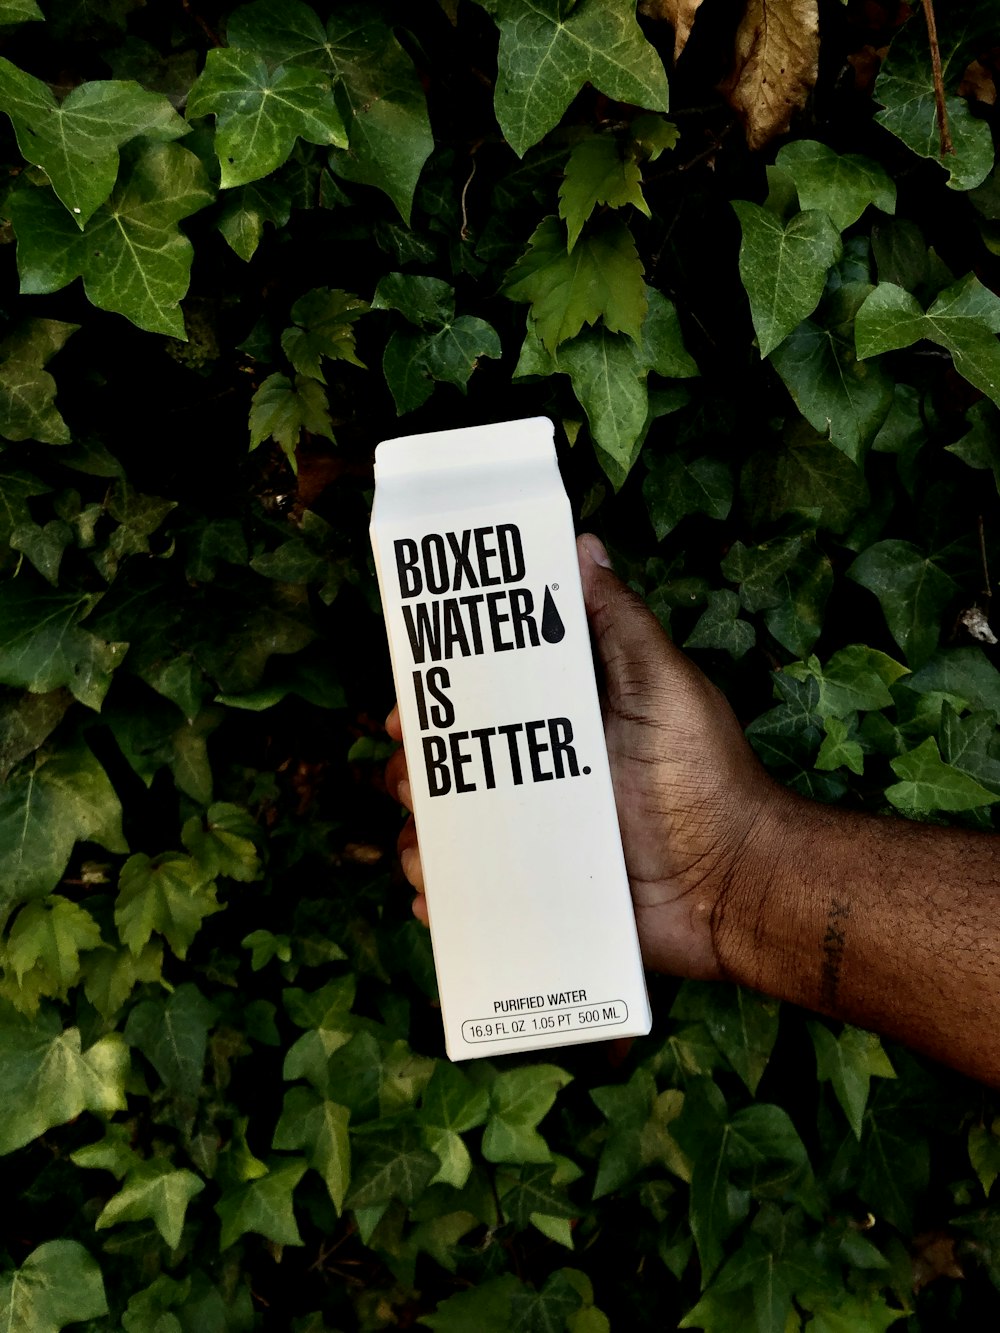 Boxed Water is Better signage